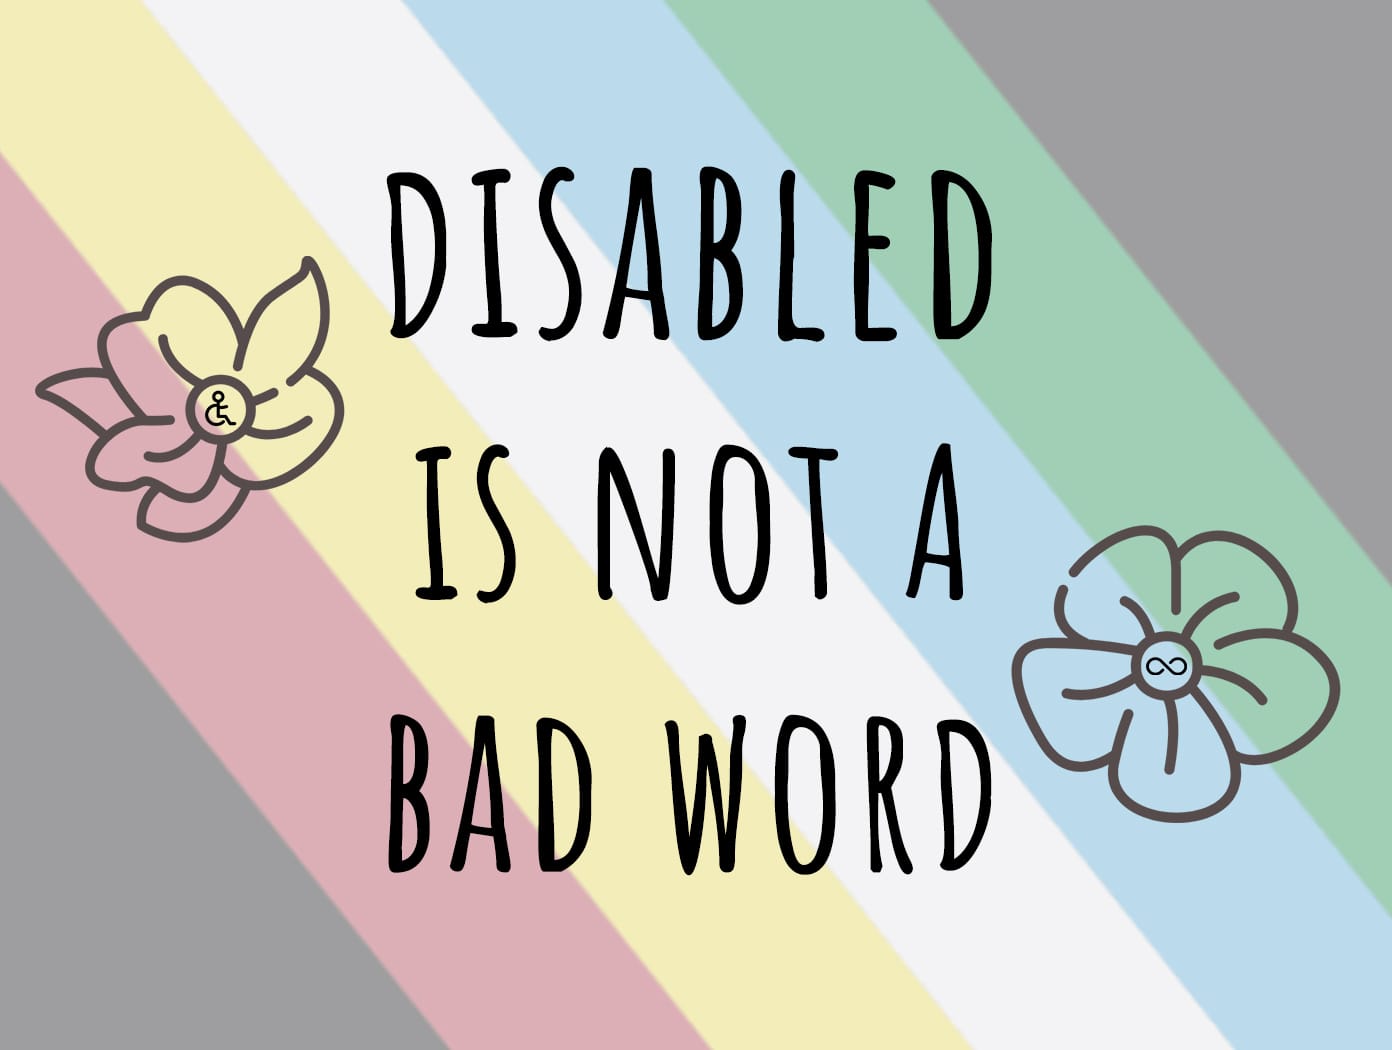 Disability Pride flag background; "DISABLED IS NOT A BAD WORD" with two flowers—1 with wheelchair symbol and 1 with infinity symbol